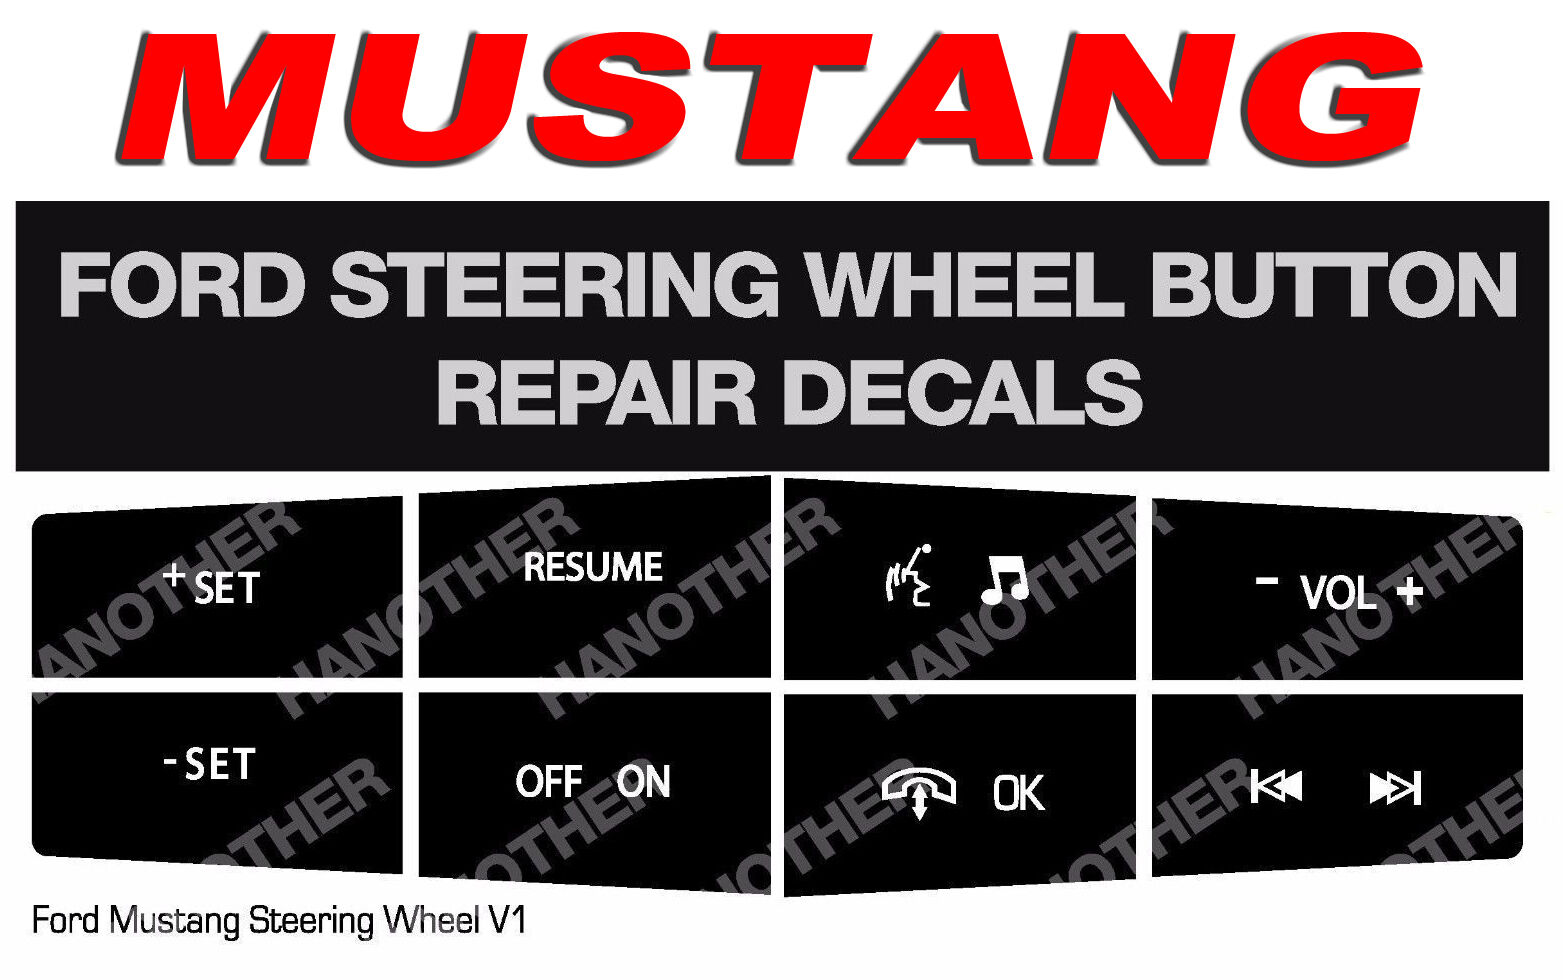 FORD MUSTANG STEERING WHEEL BUTTON REPAIR DECALS STICKERS 